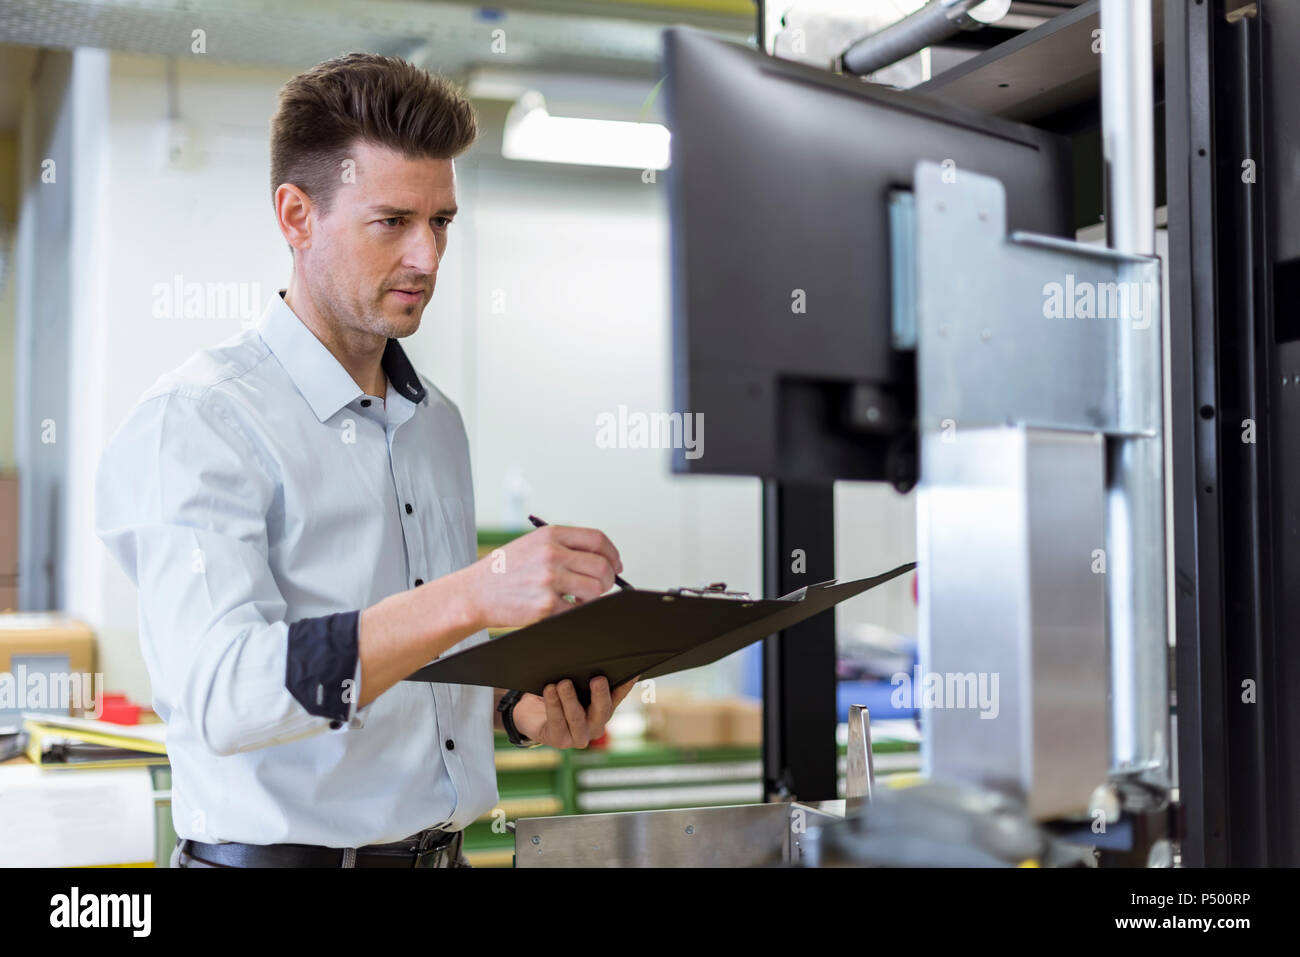 Man with clipboard in factory looking at screen Stock Photo